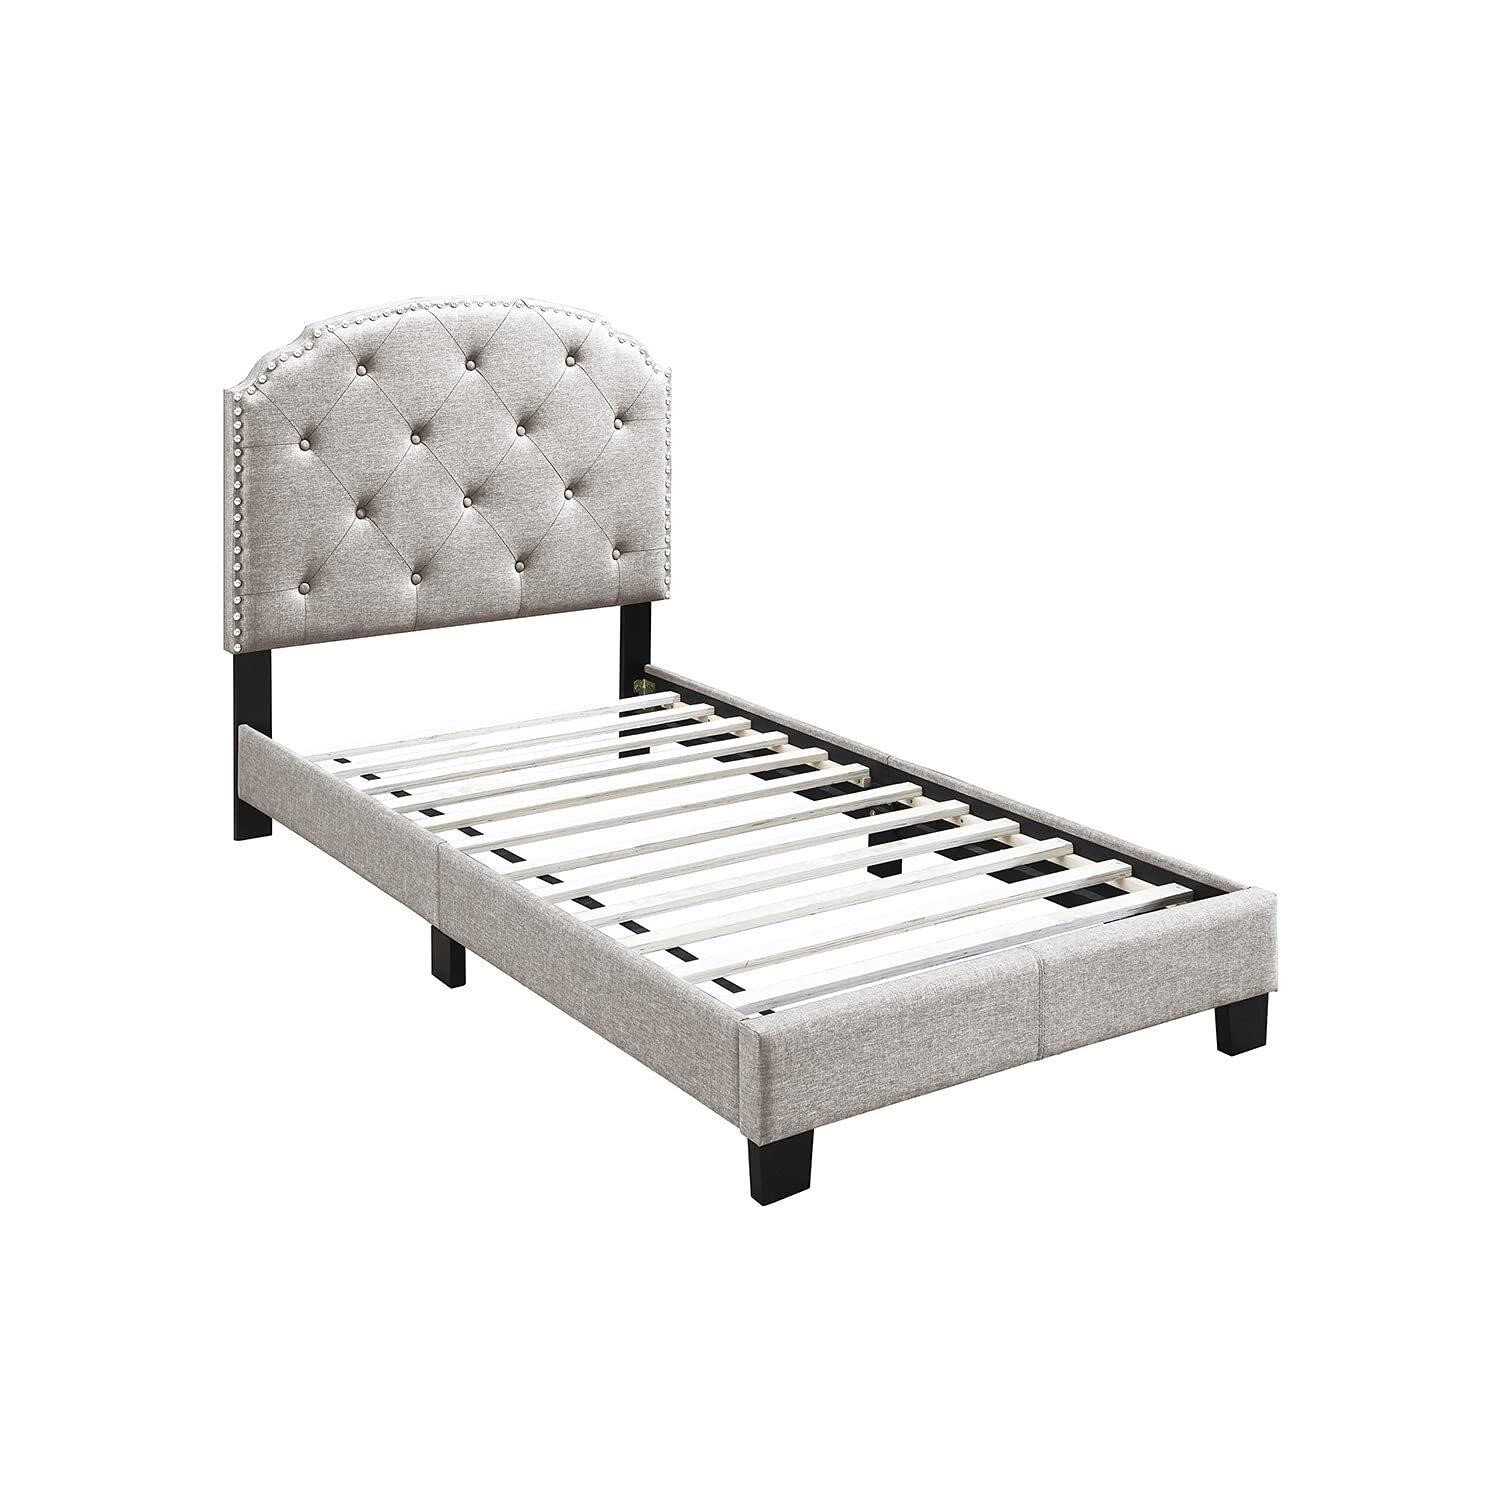 Poundex Button Tufting Design Twin Bed in Light Br